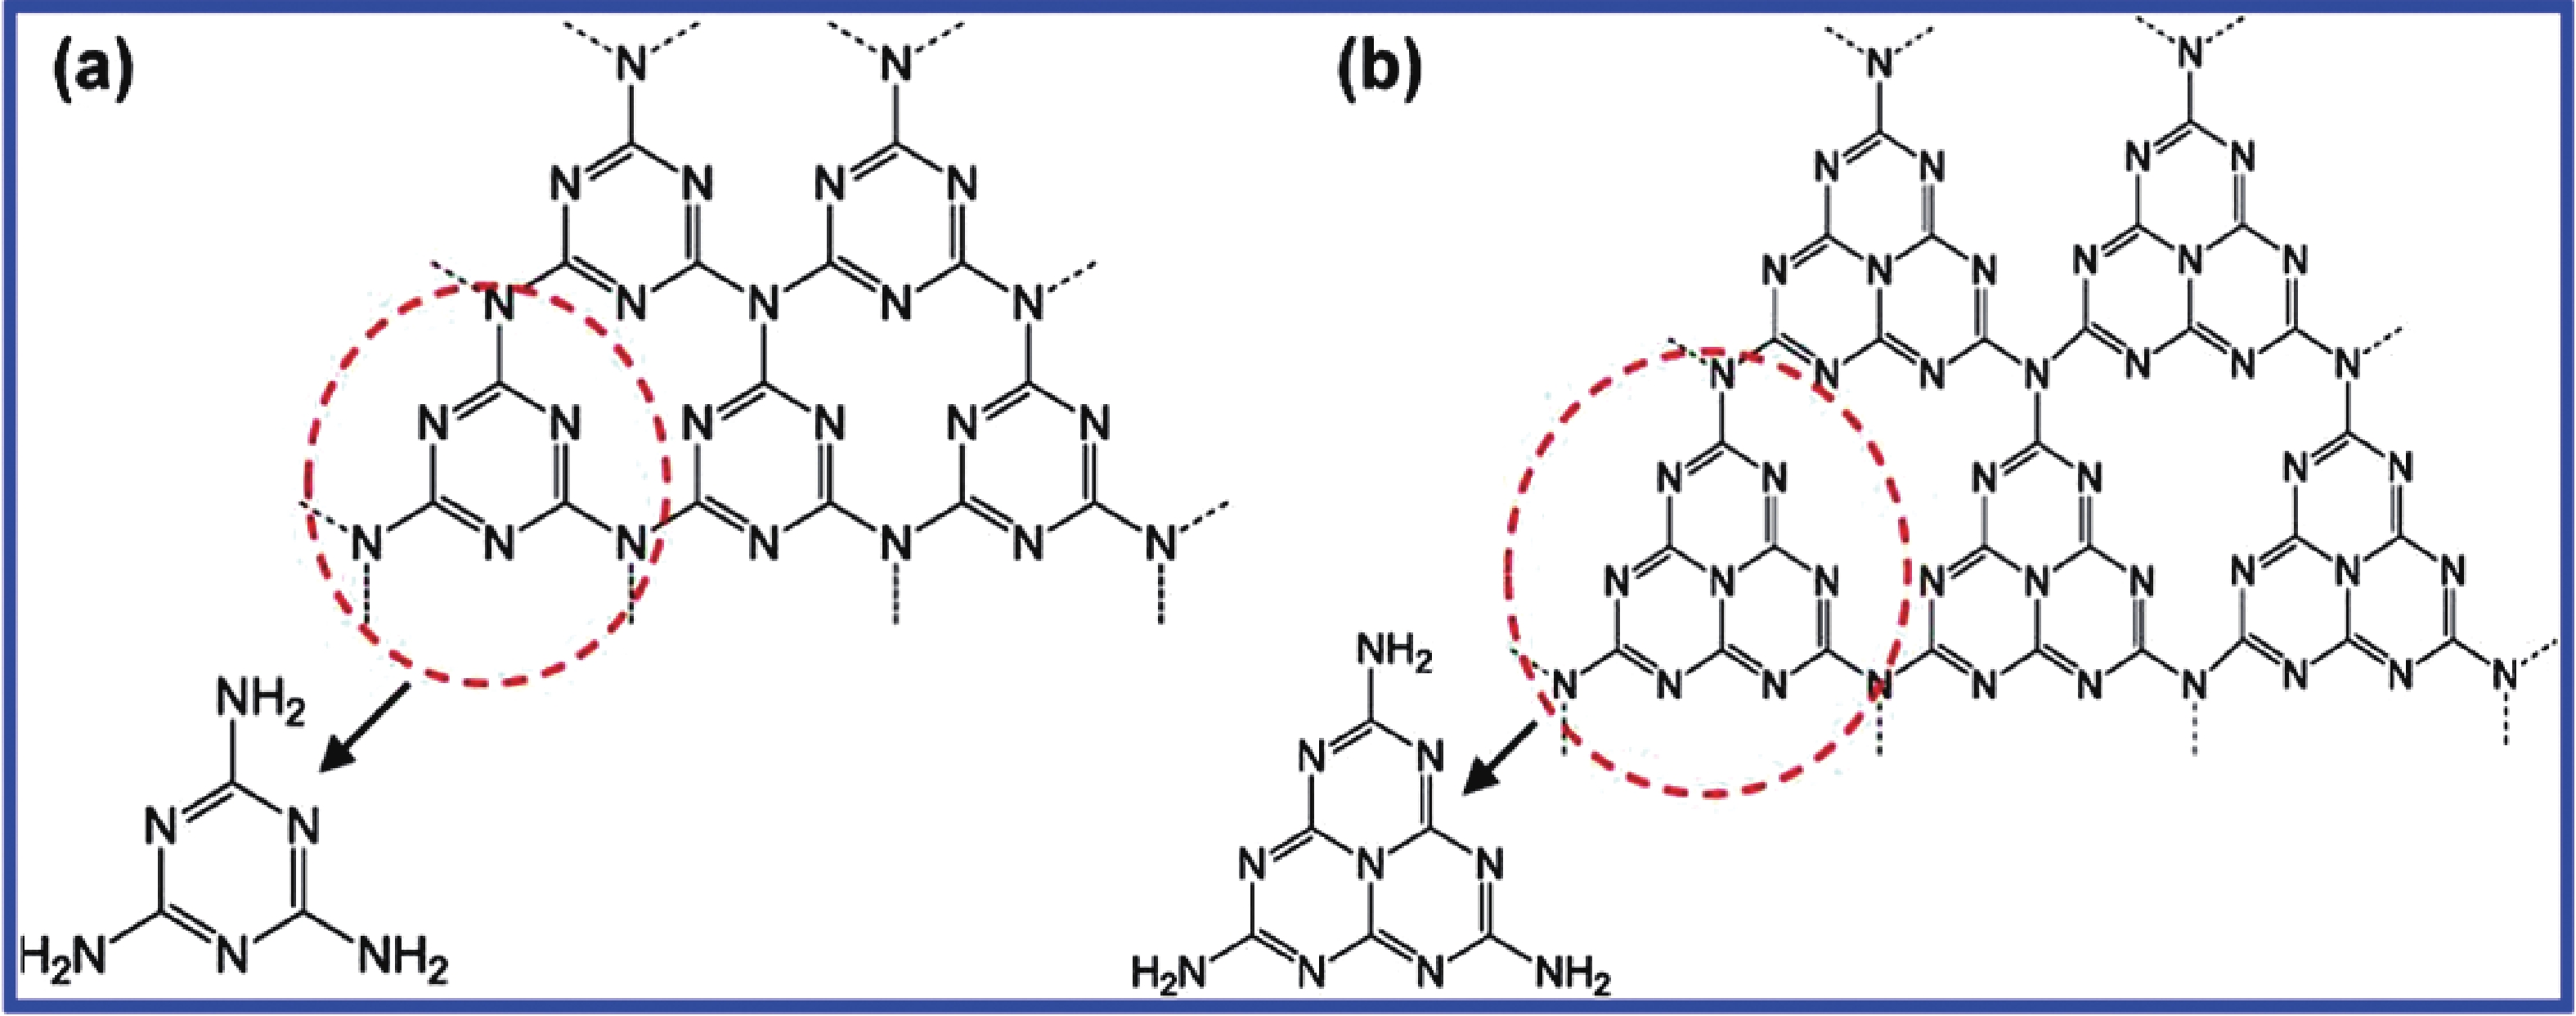 (Color online) The schematic structure of triazine (a) and tri-s-triazine (heptazine) (b) in g-C3N4. Reprinted from Ref. [10].